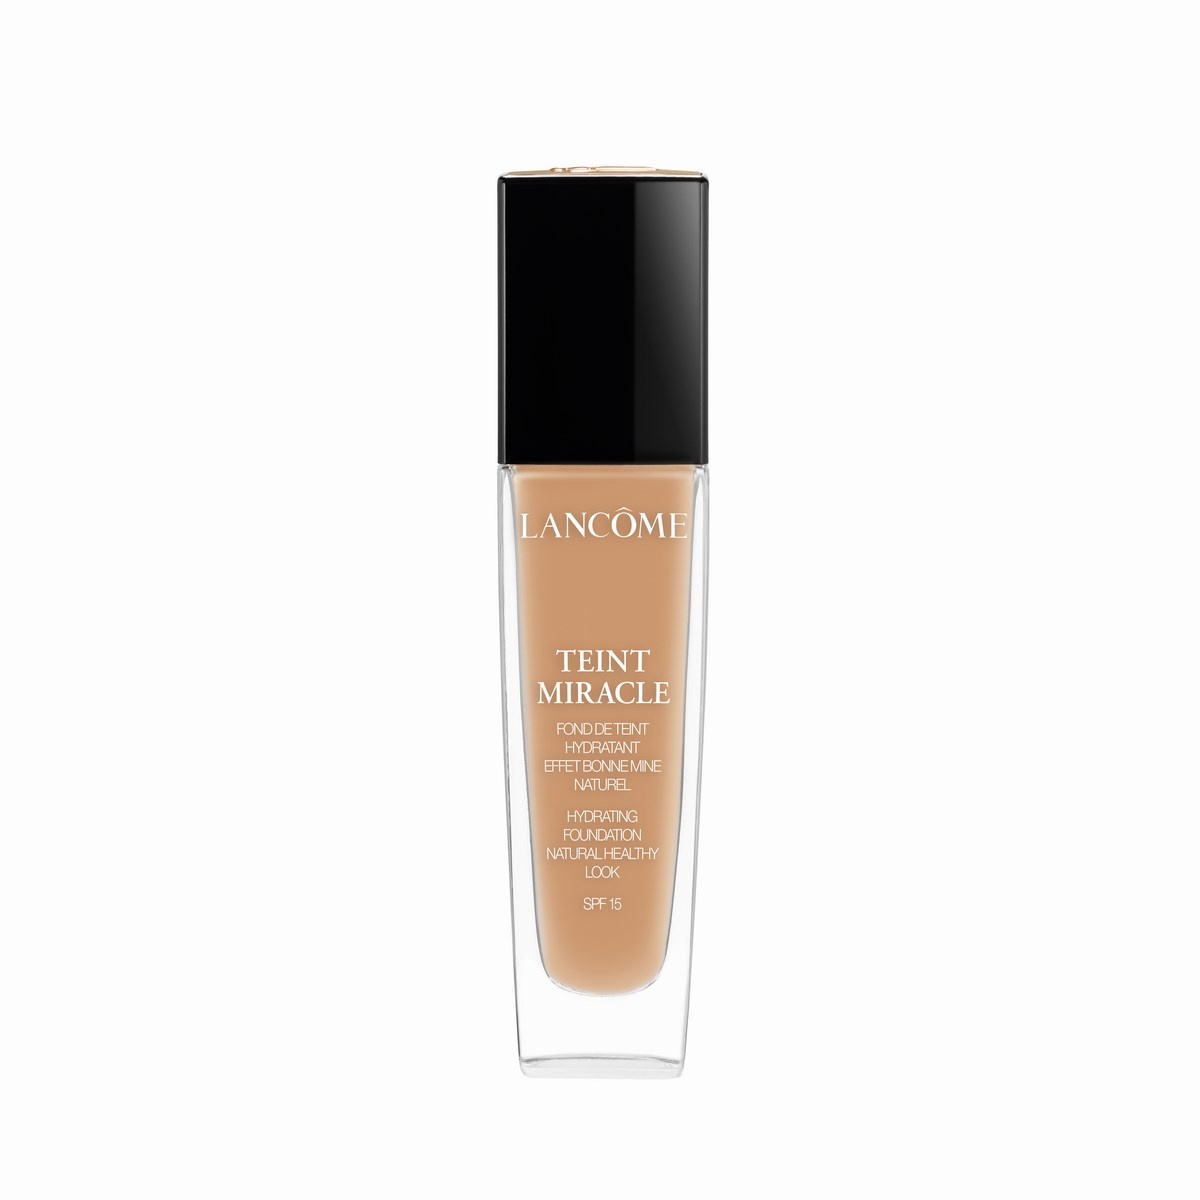  Teint Miracle Hydrating Foundation, 06 Beige Canelle